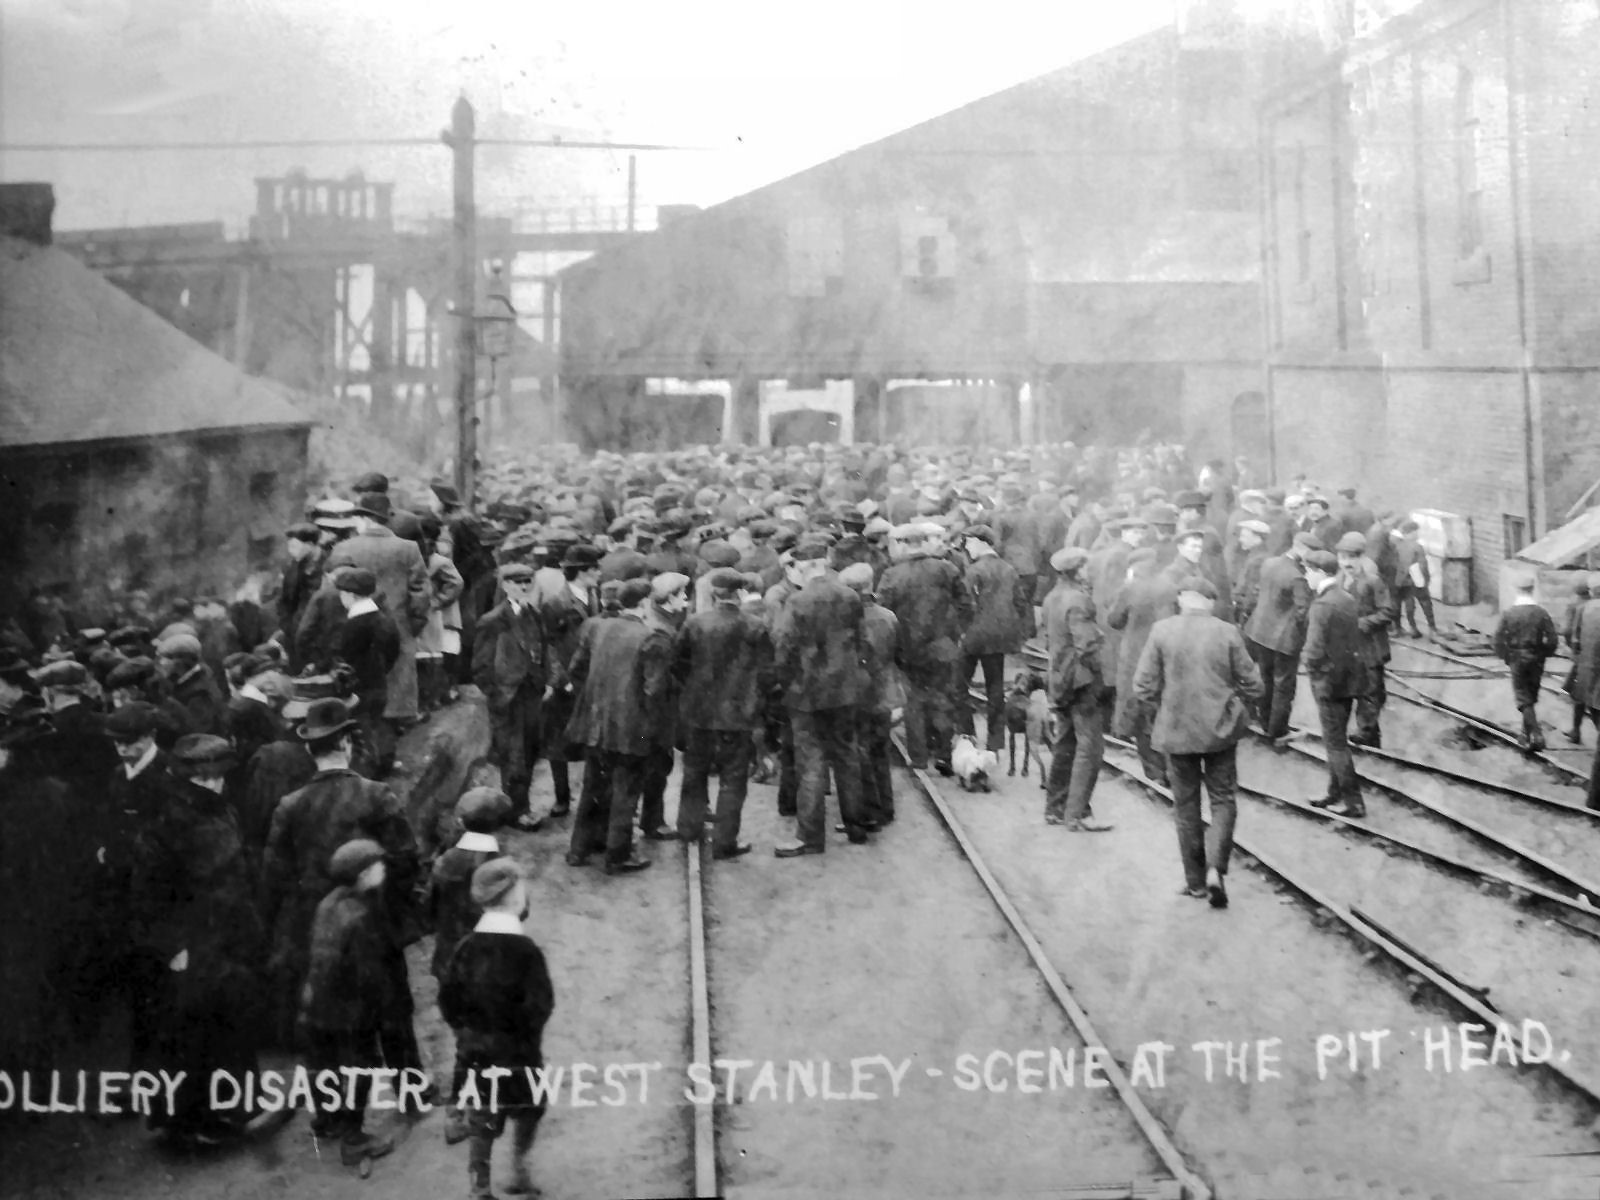 Left, the crowd at pithead after the Burn Pit disaster of February 16, 1909, and, right, the mass funeral procession through the town’s streets 